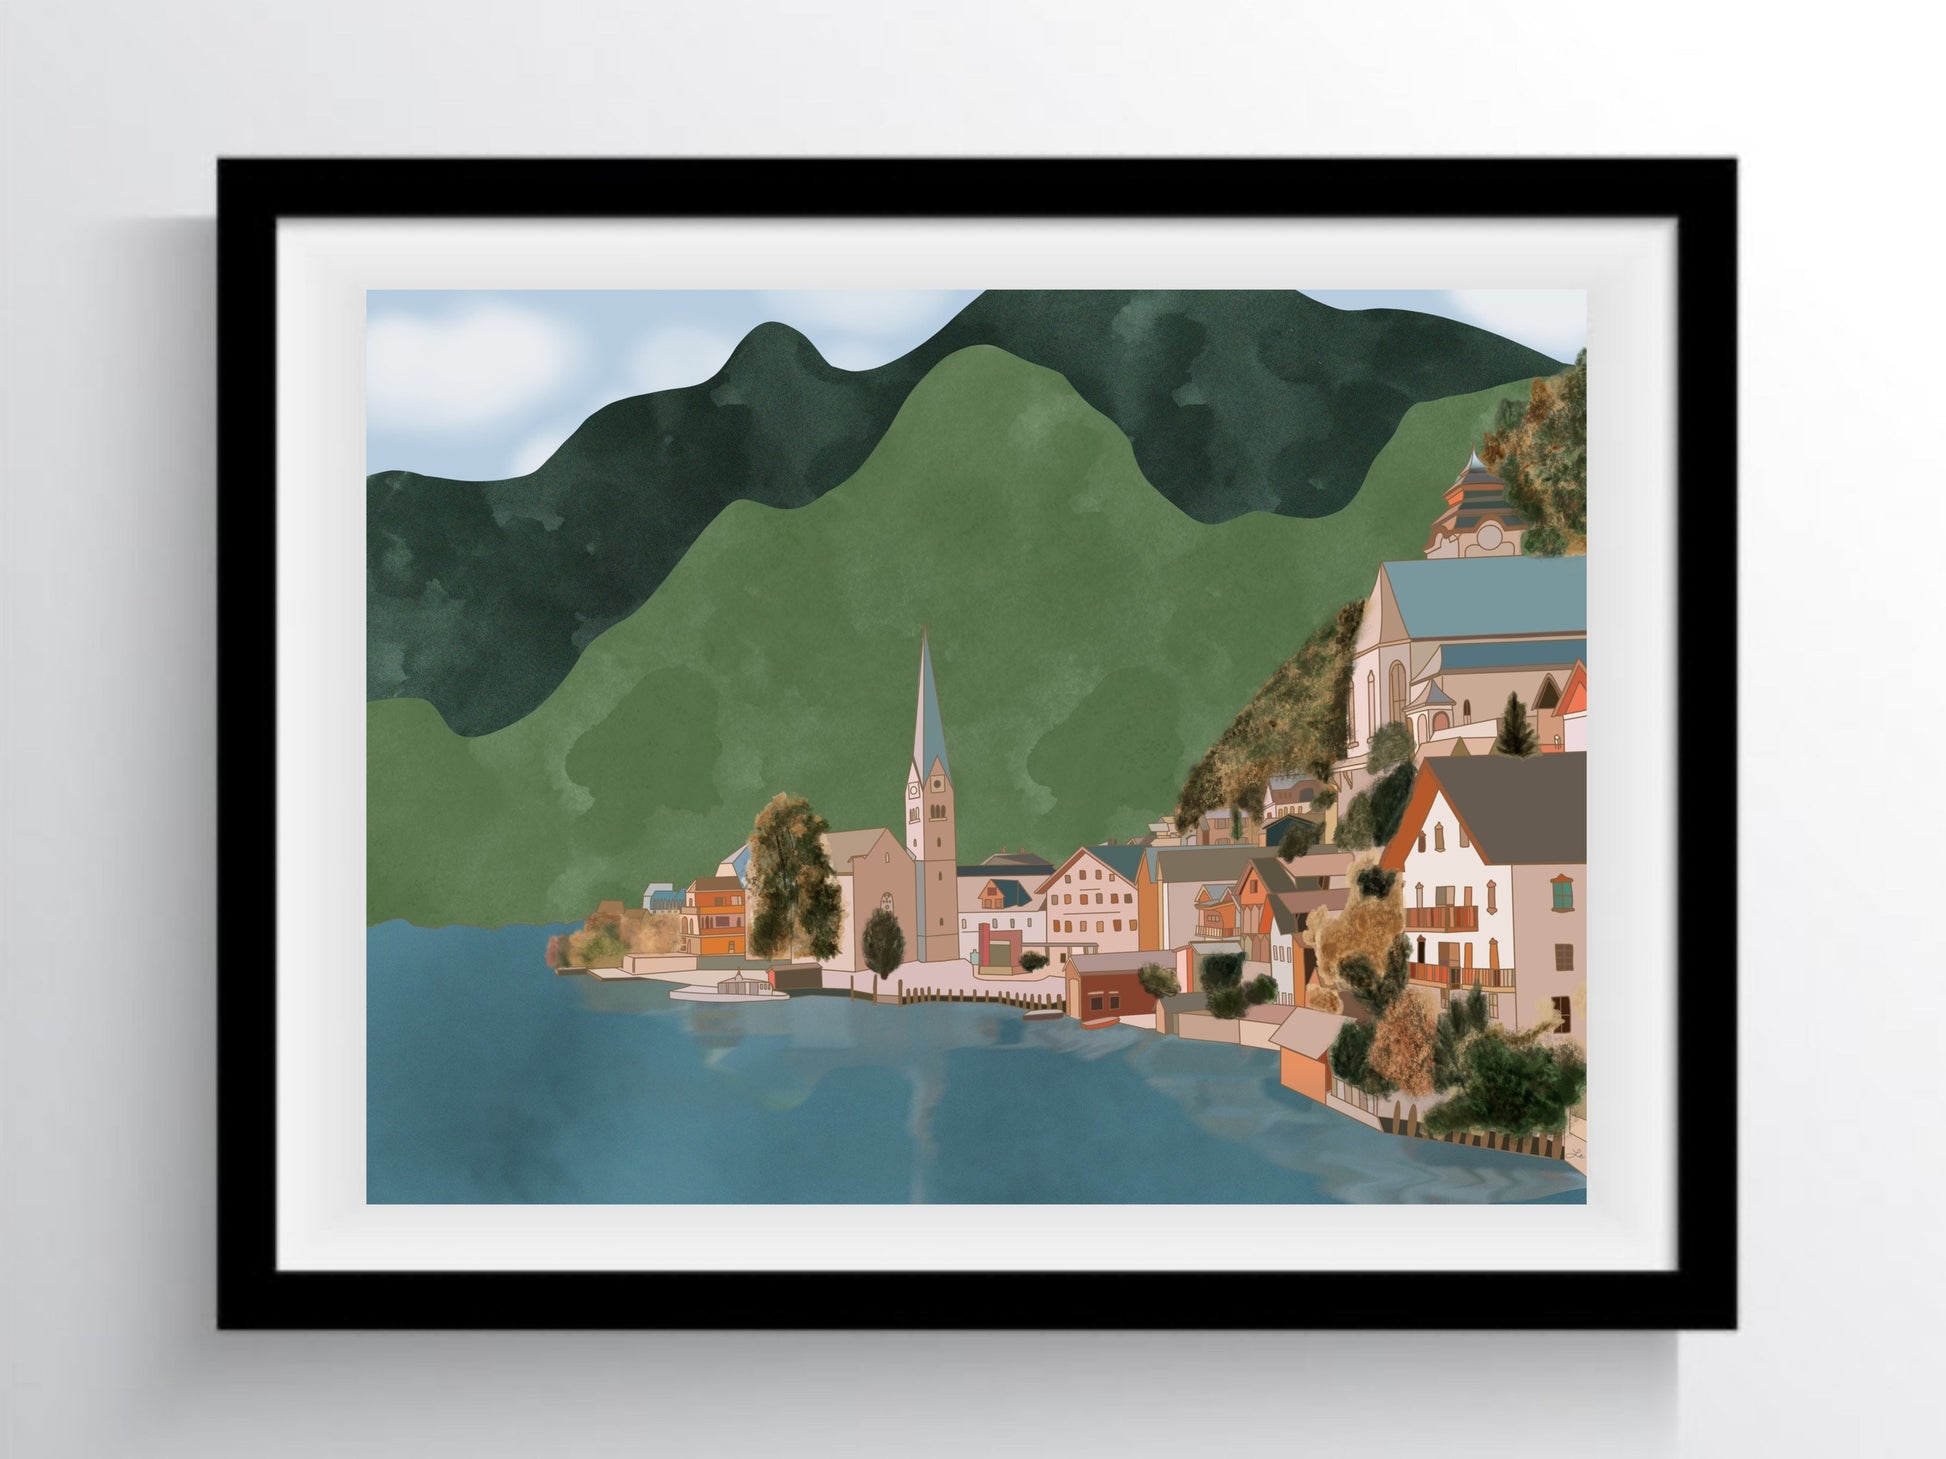 This wall art displays a city scene in Hallstatt, Austria with its beautiful mountains and buildings along the coast of the water. The photo was digitally drawn by hand with lots of love. When you hang this artwork on your walls I hope you are transported across the world over to Austria! You can just frame this in your at-home office and stare at it as you daydream while you work (that's what I do at least!). This makes for a wonderful Austria souvenir or a great gift for any travel lover. 